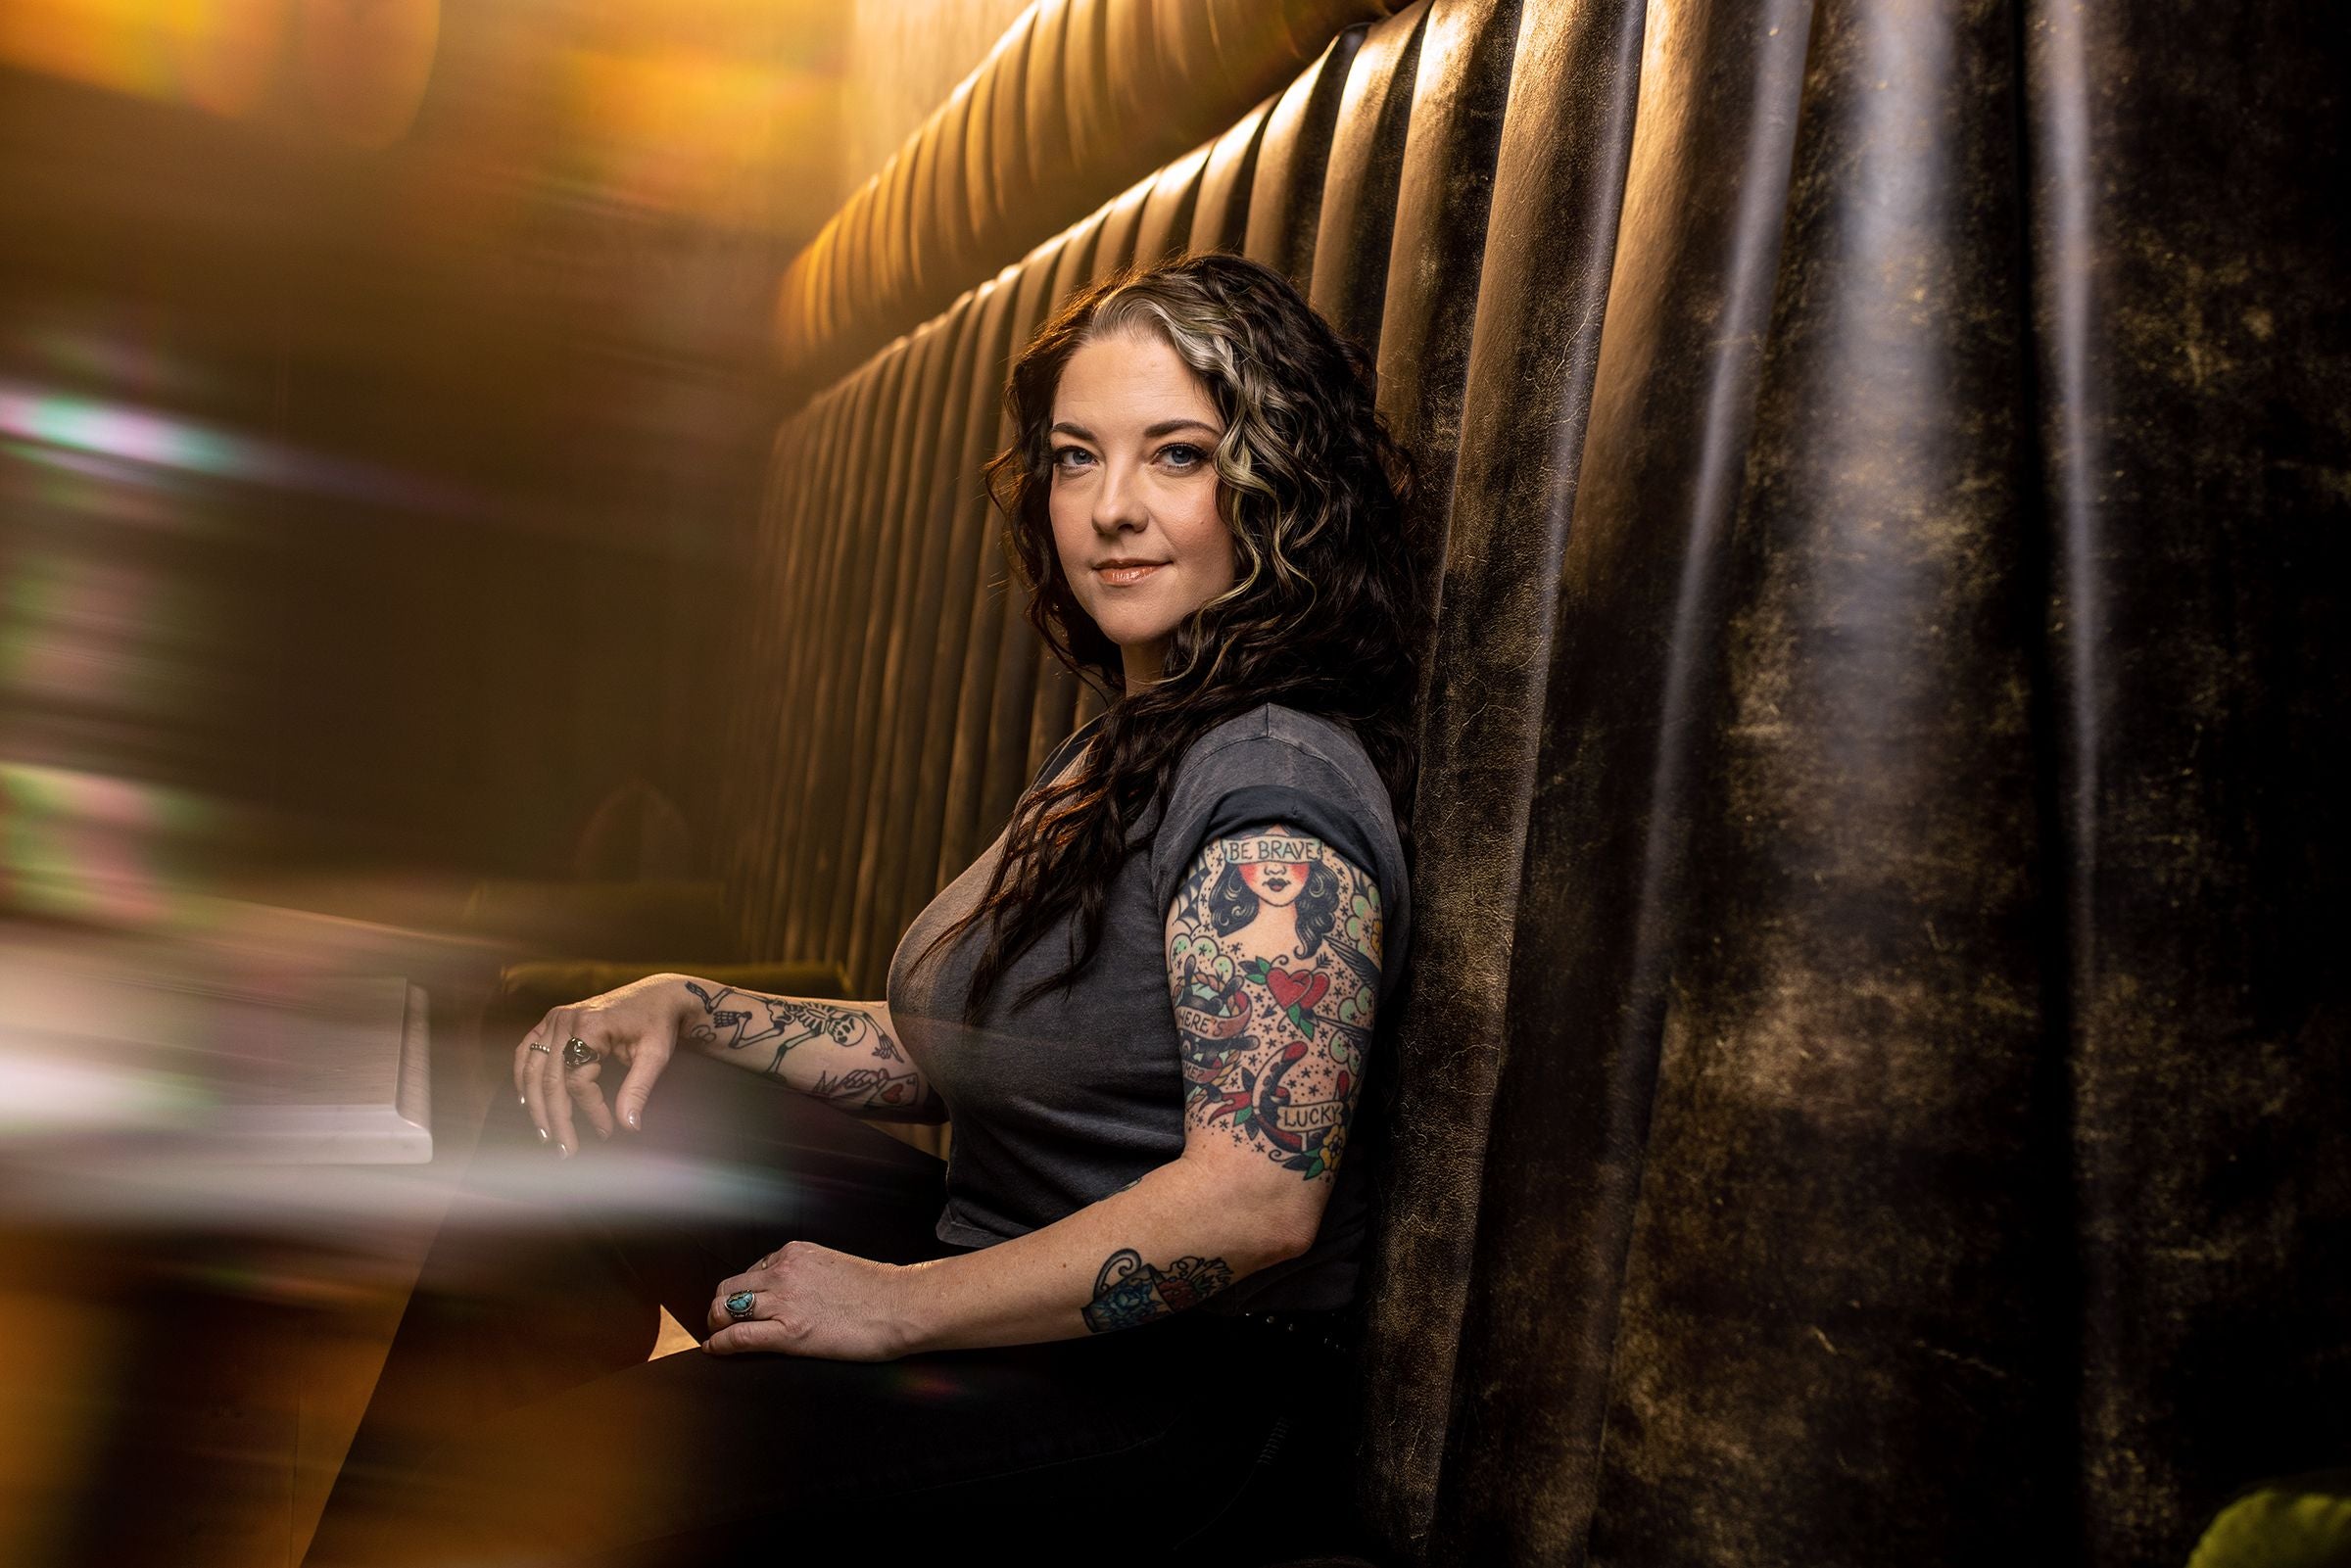 Ashley McBryde: The Devil I Know Tour free presale info for performance tickets in North Charleston, SC (North Charleston Performing Arts Center)